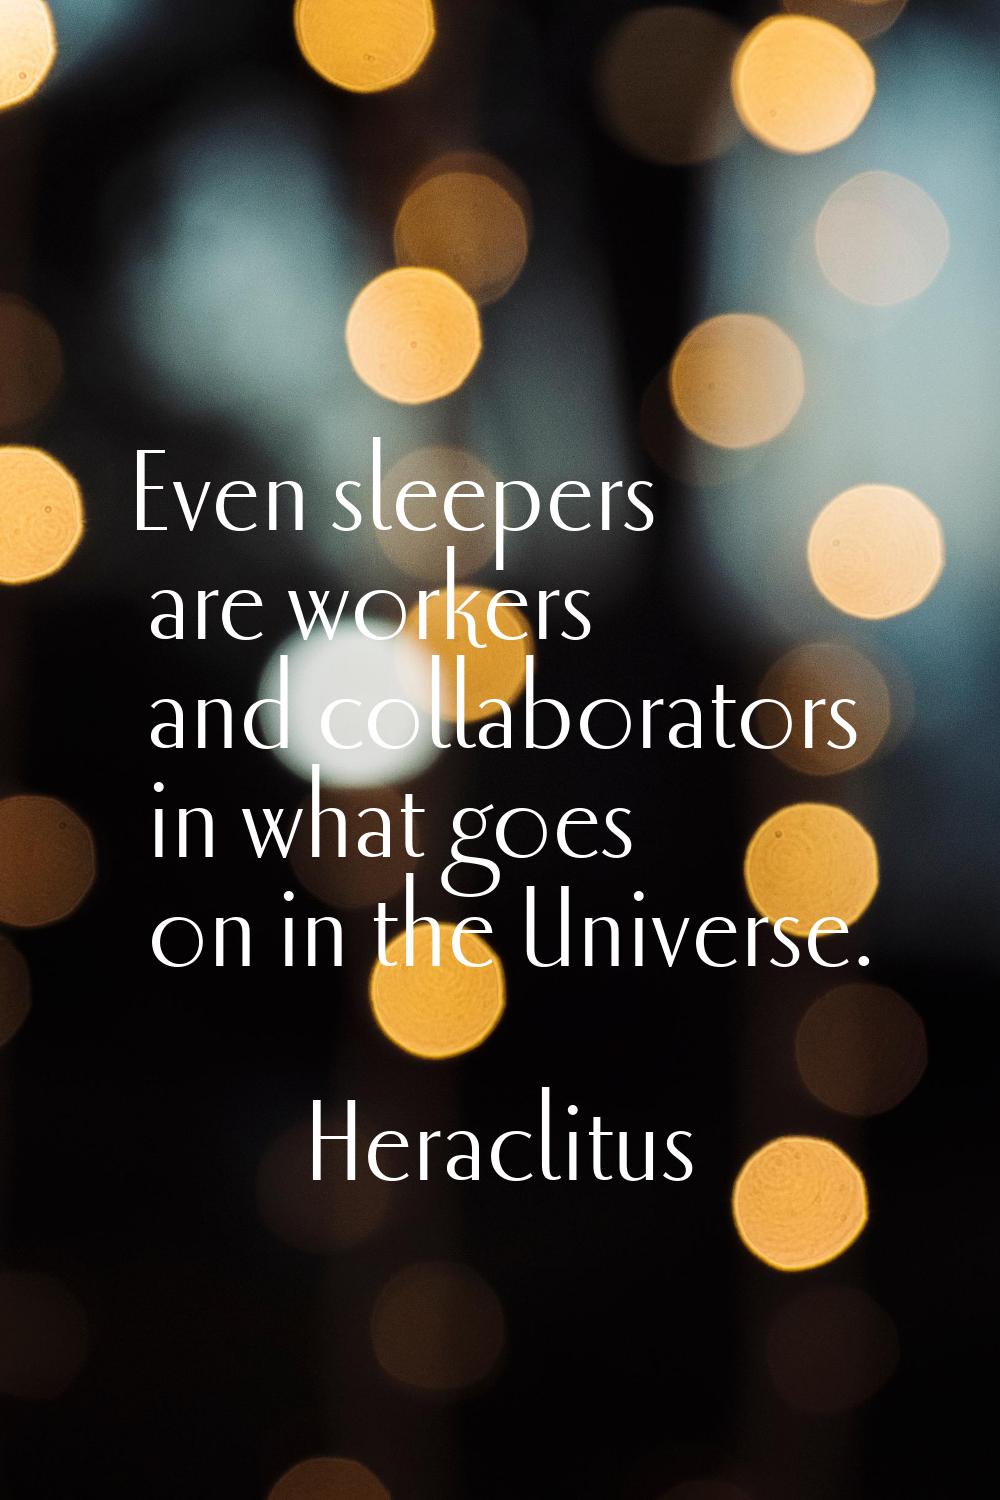 Even sleepers are workers and collaborators in what goes on in the Universe.